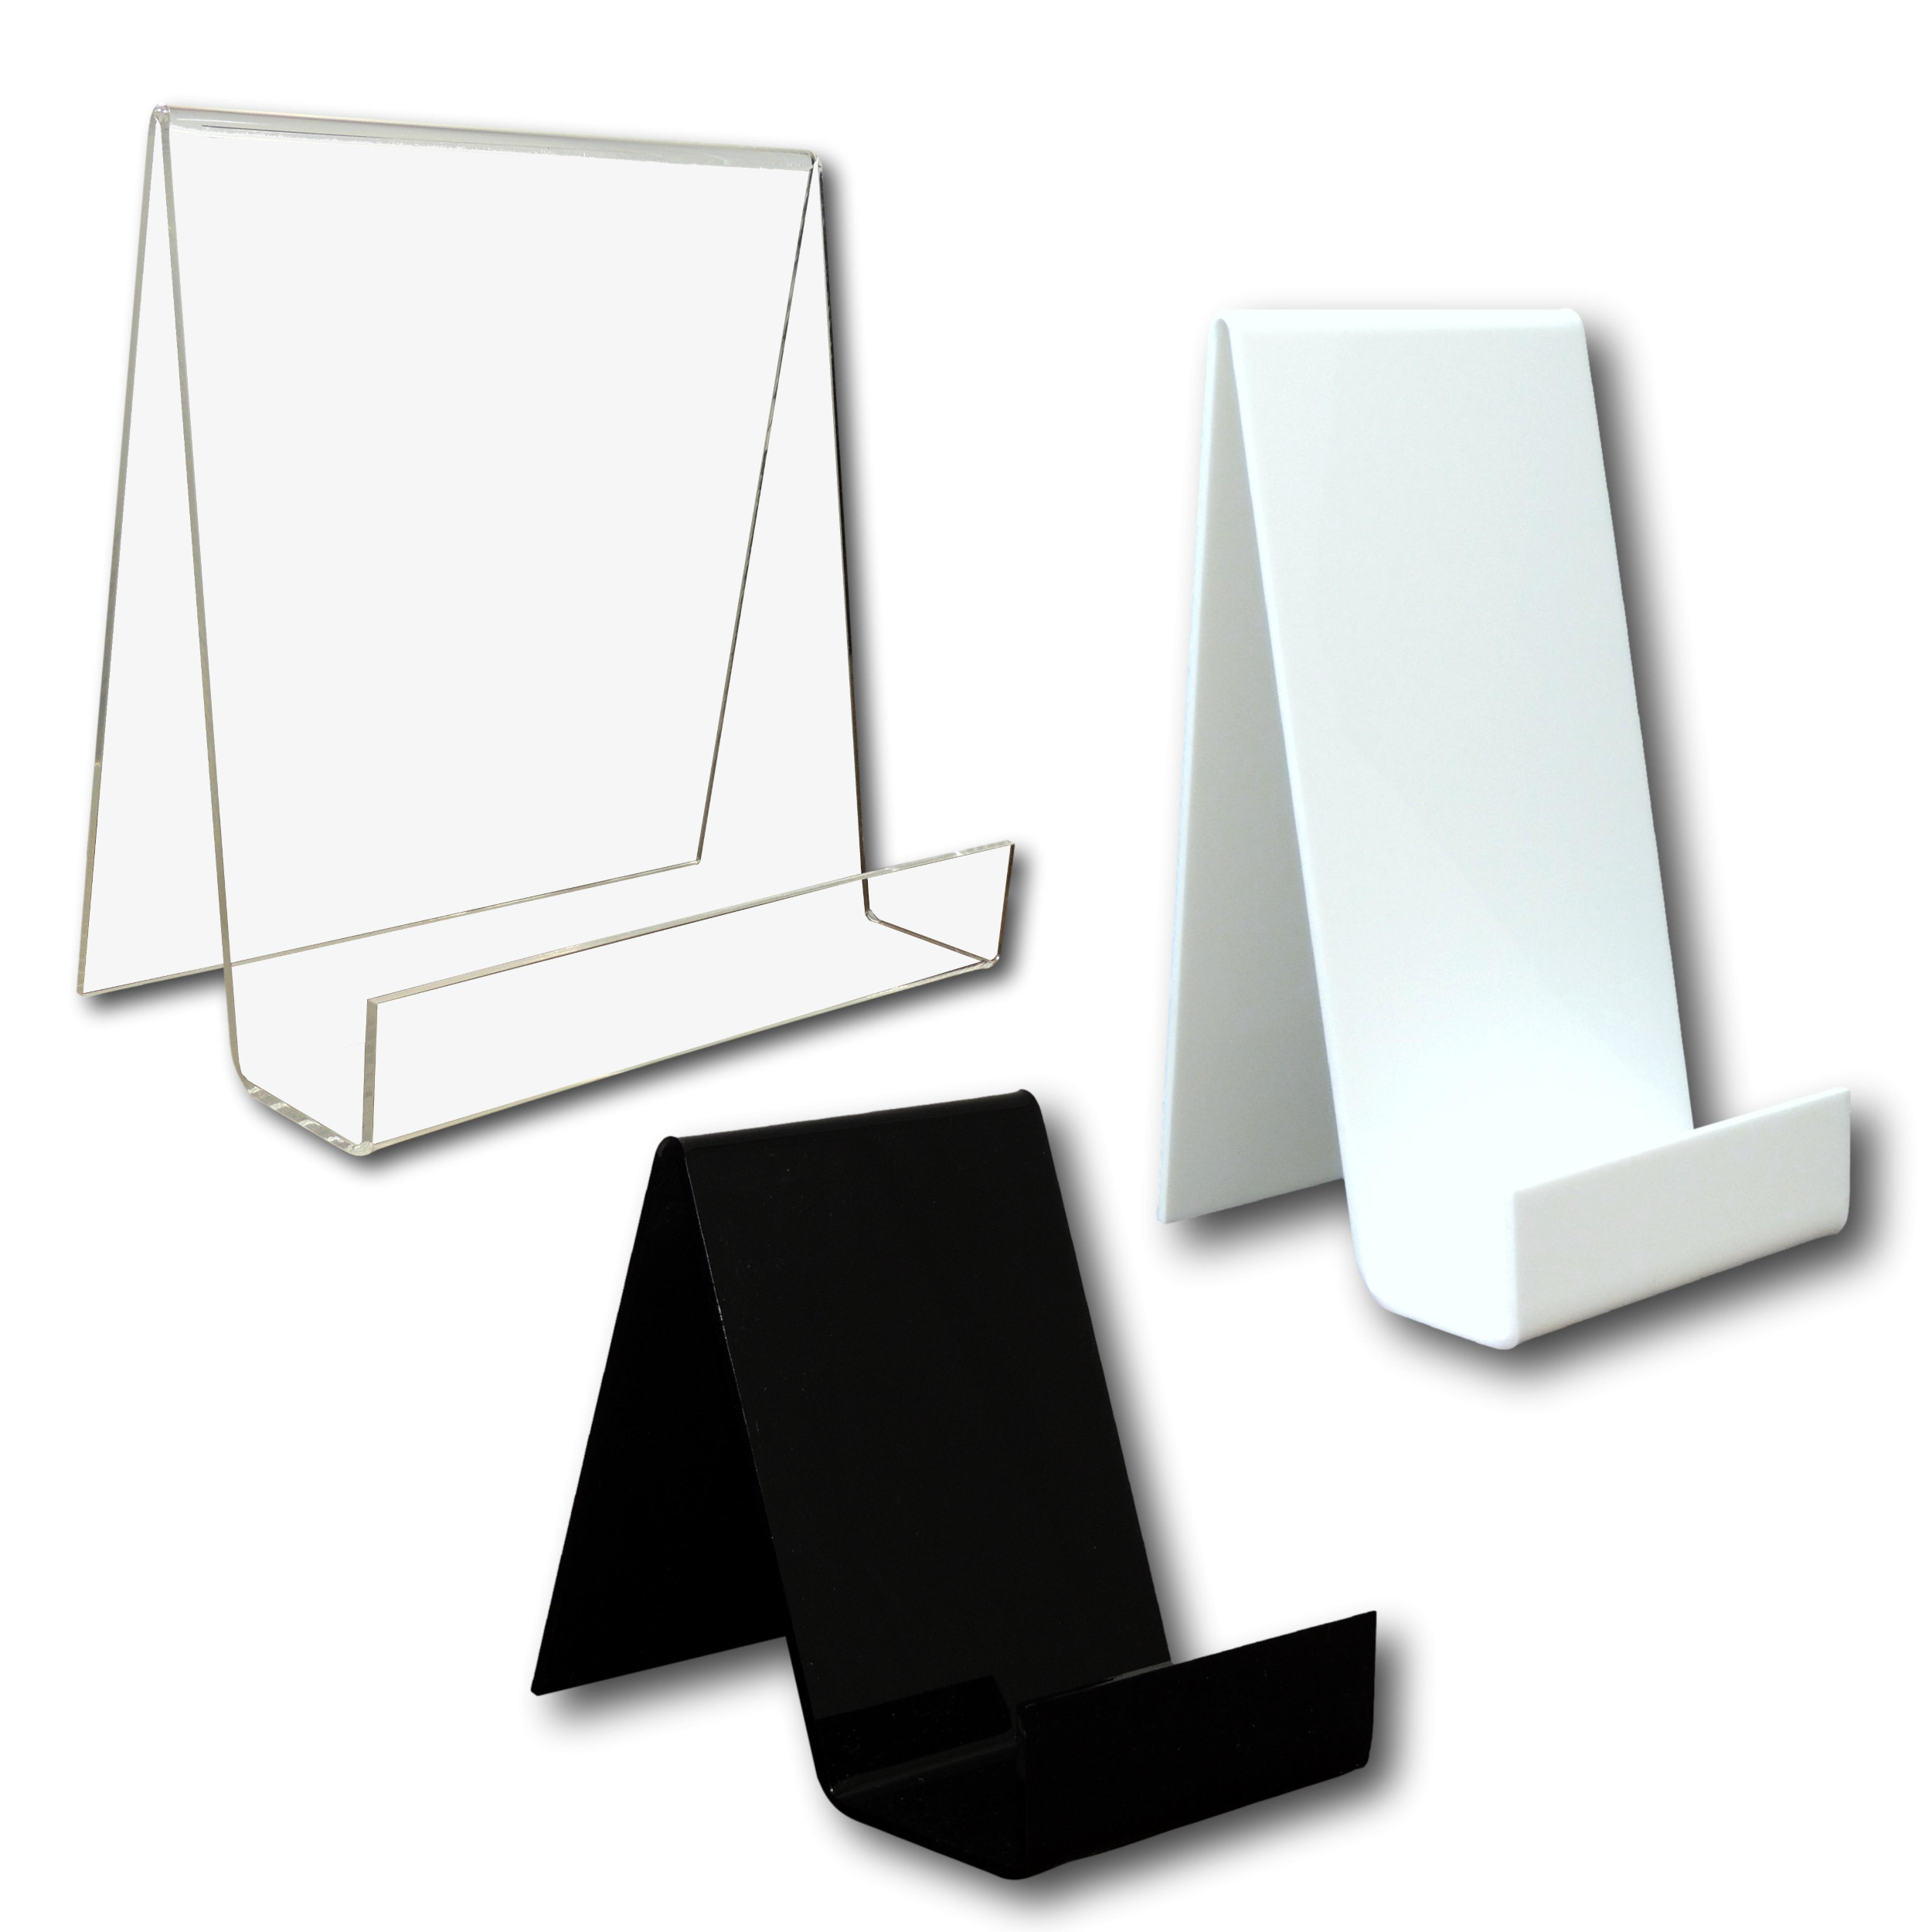 Book Display Stands - Clear / Black / White